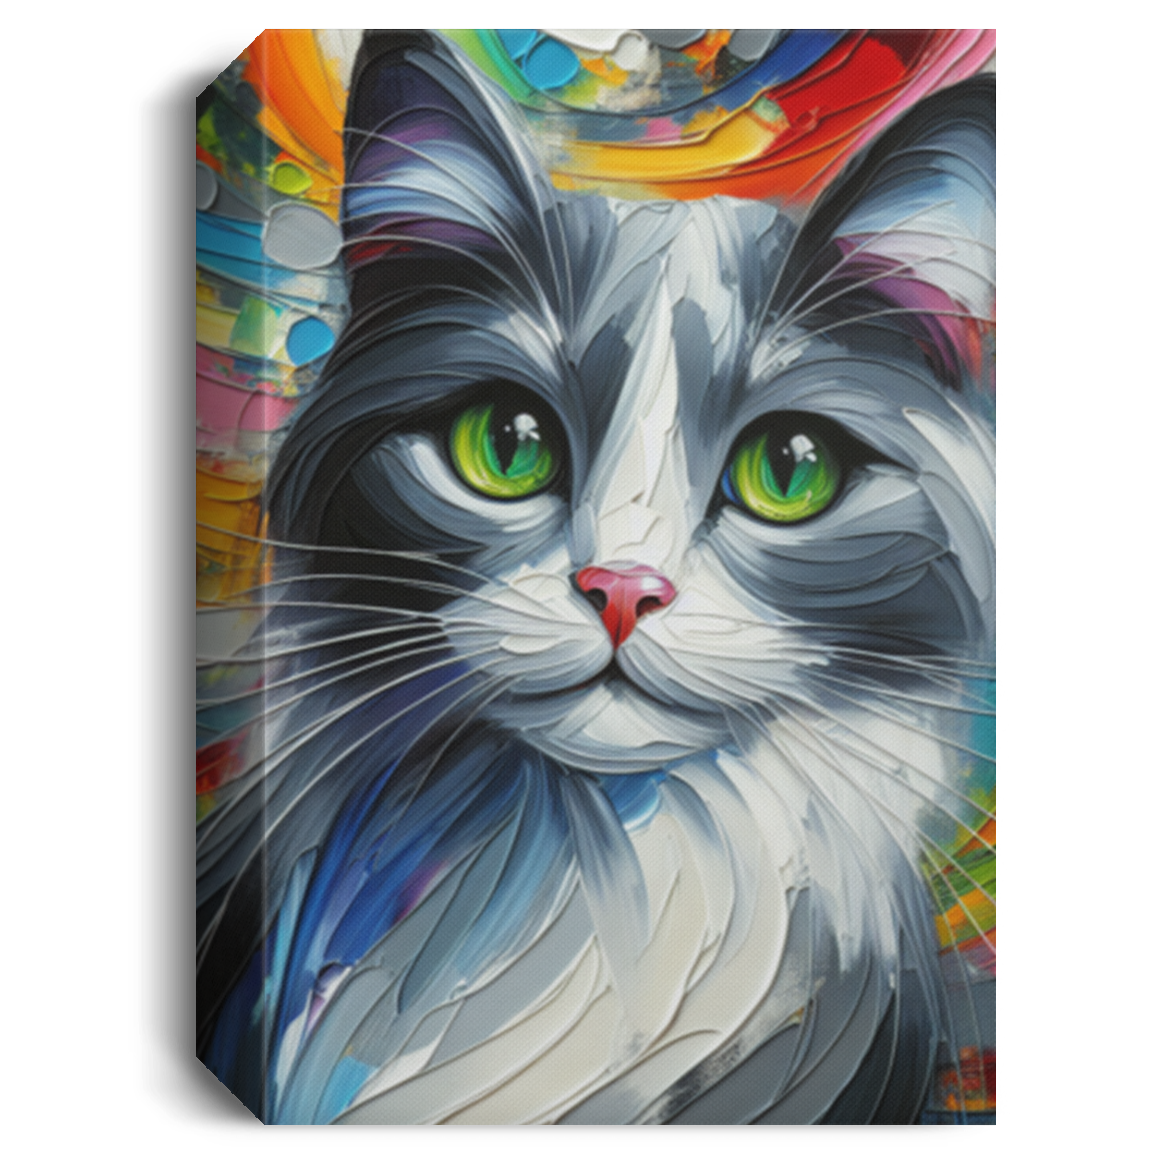 Grey and White Cat - Canvas Art Prints